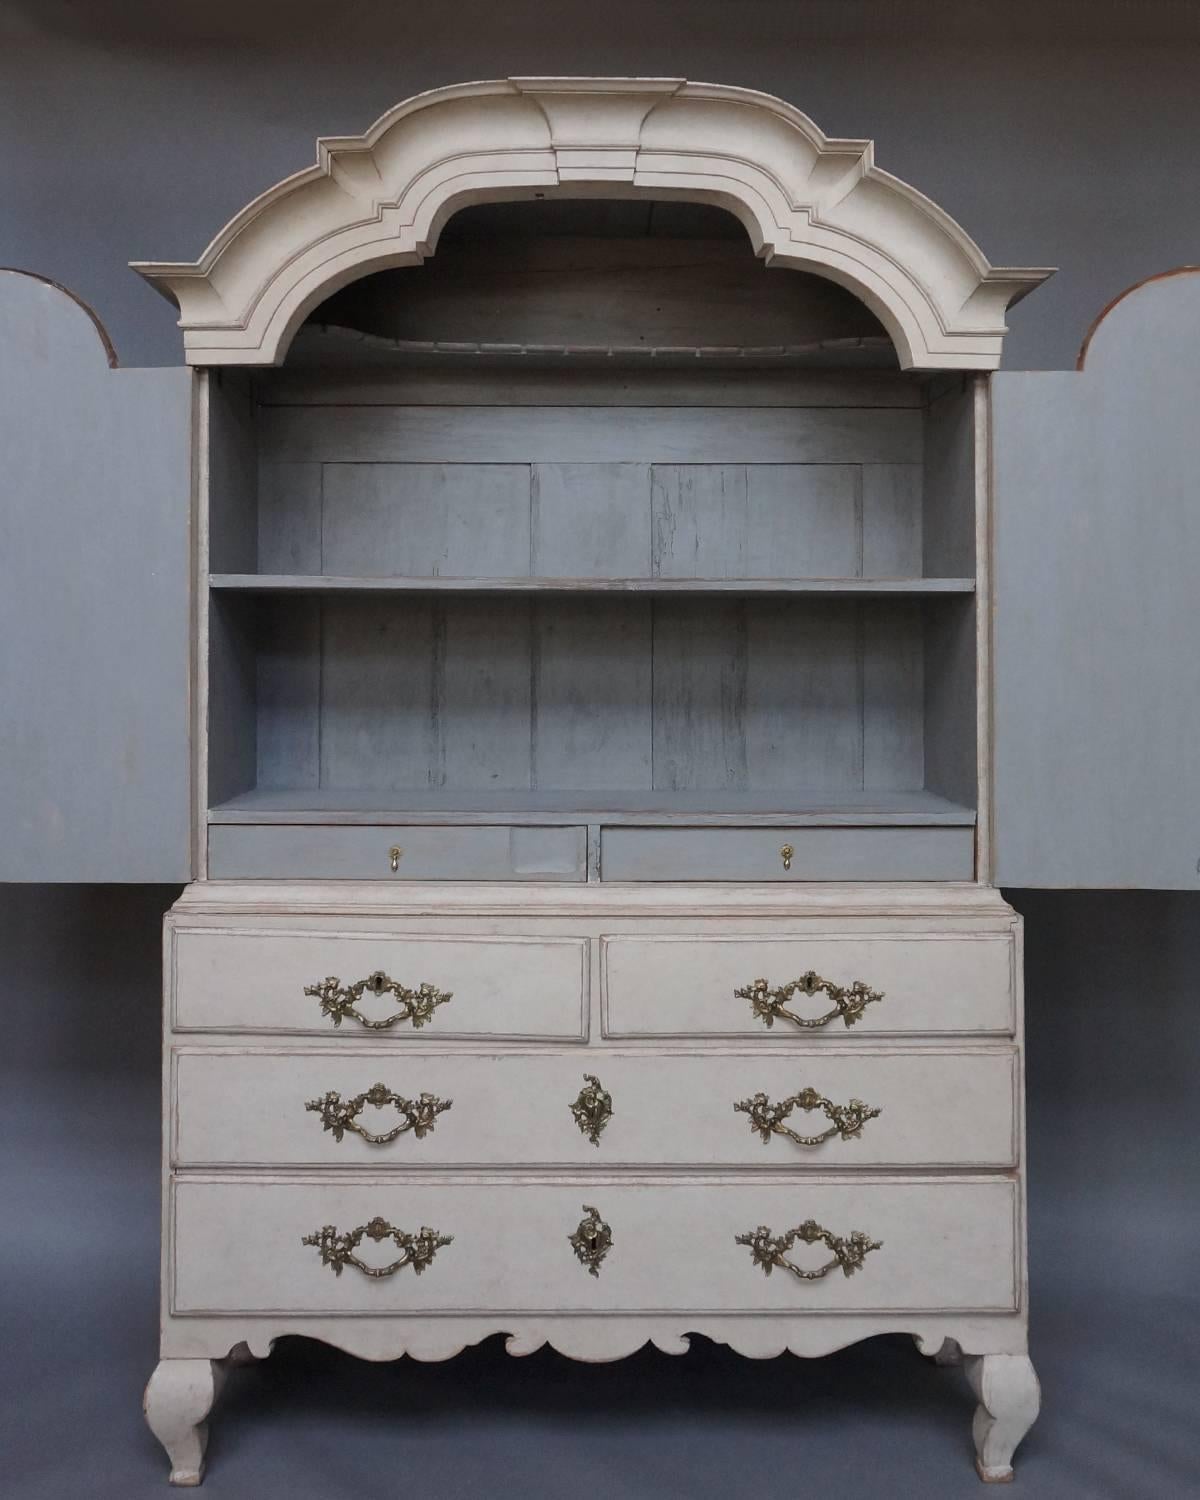 Swedish Baroque cabinet in two parts, circa 1760, with original hardware. The upper section has two shelves and two drawers behind double doors, all under an arched cornice. The lower section has two over two drawers on a shaped base with compressed